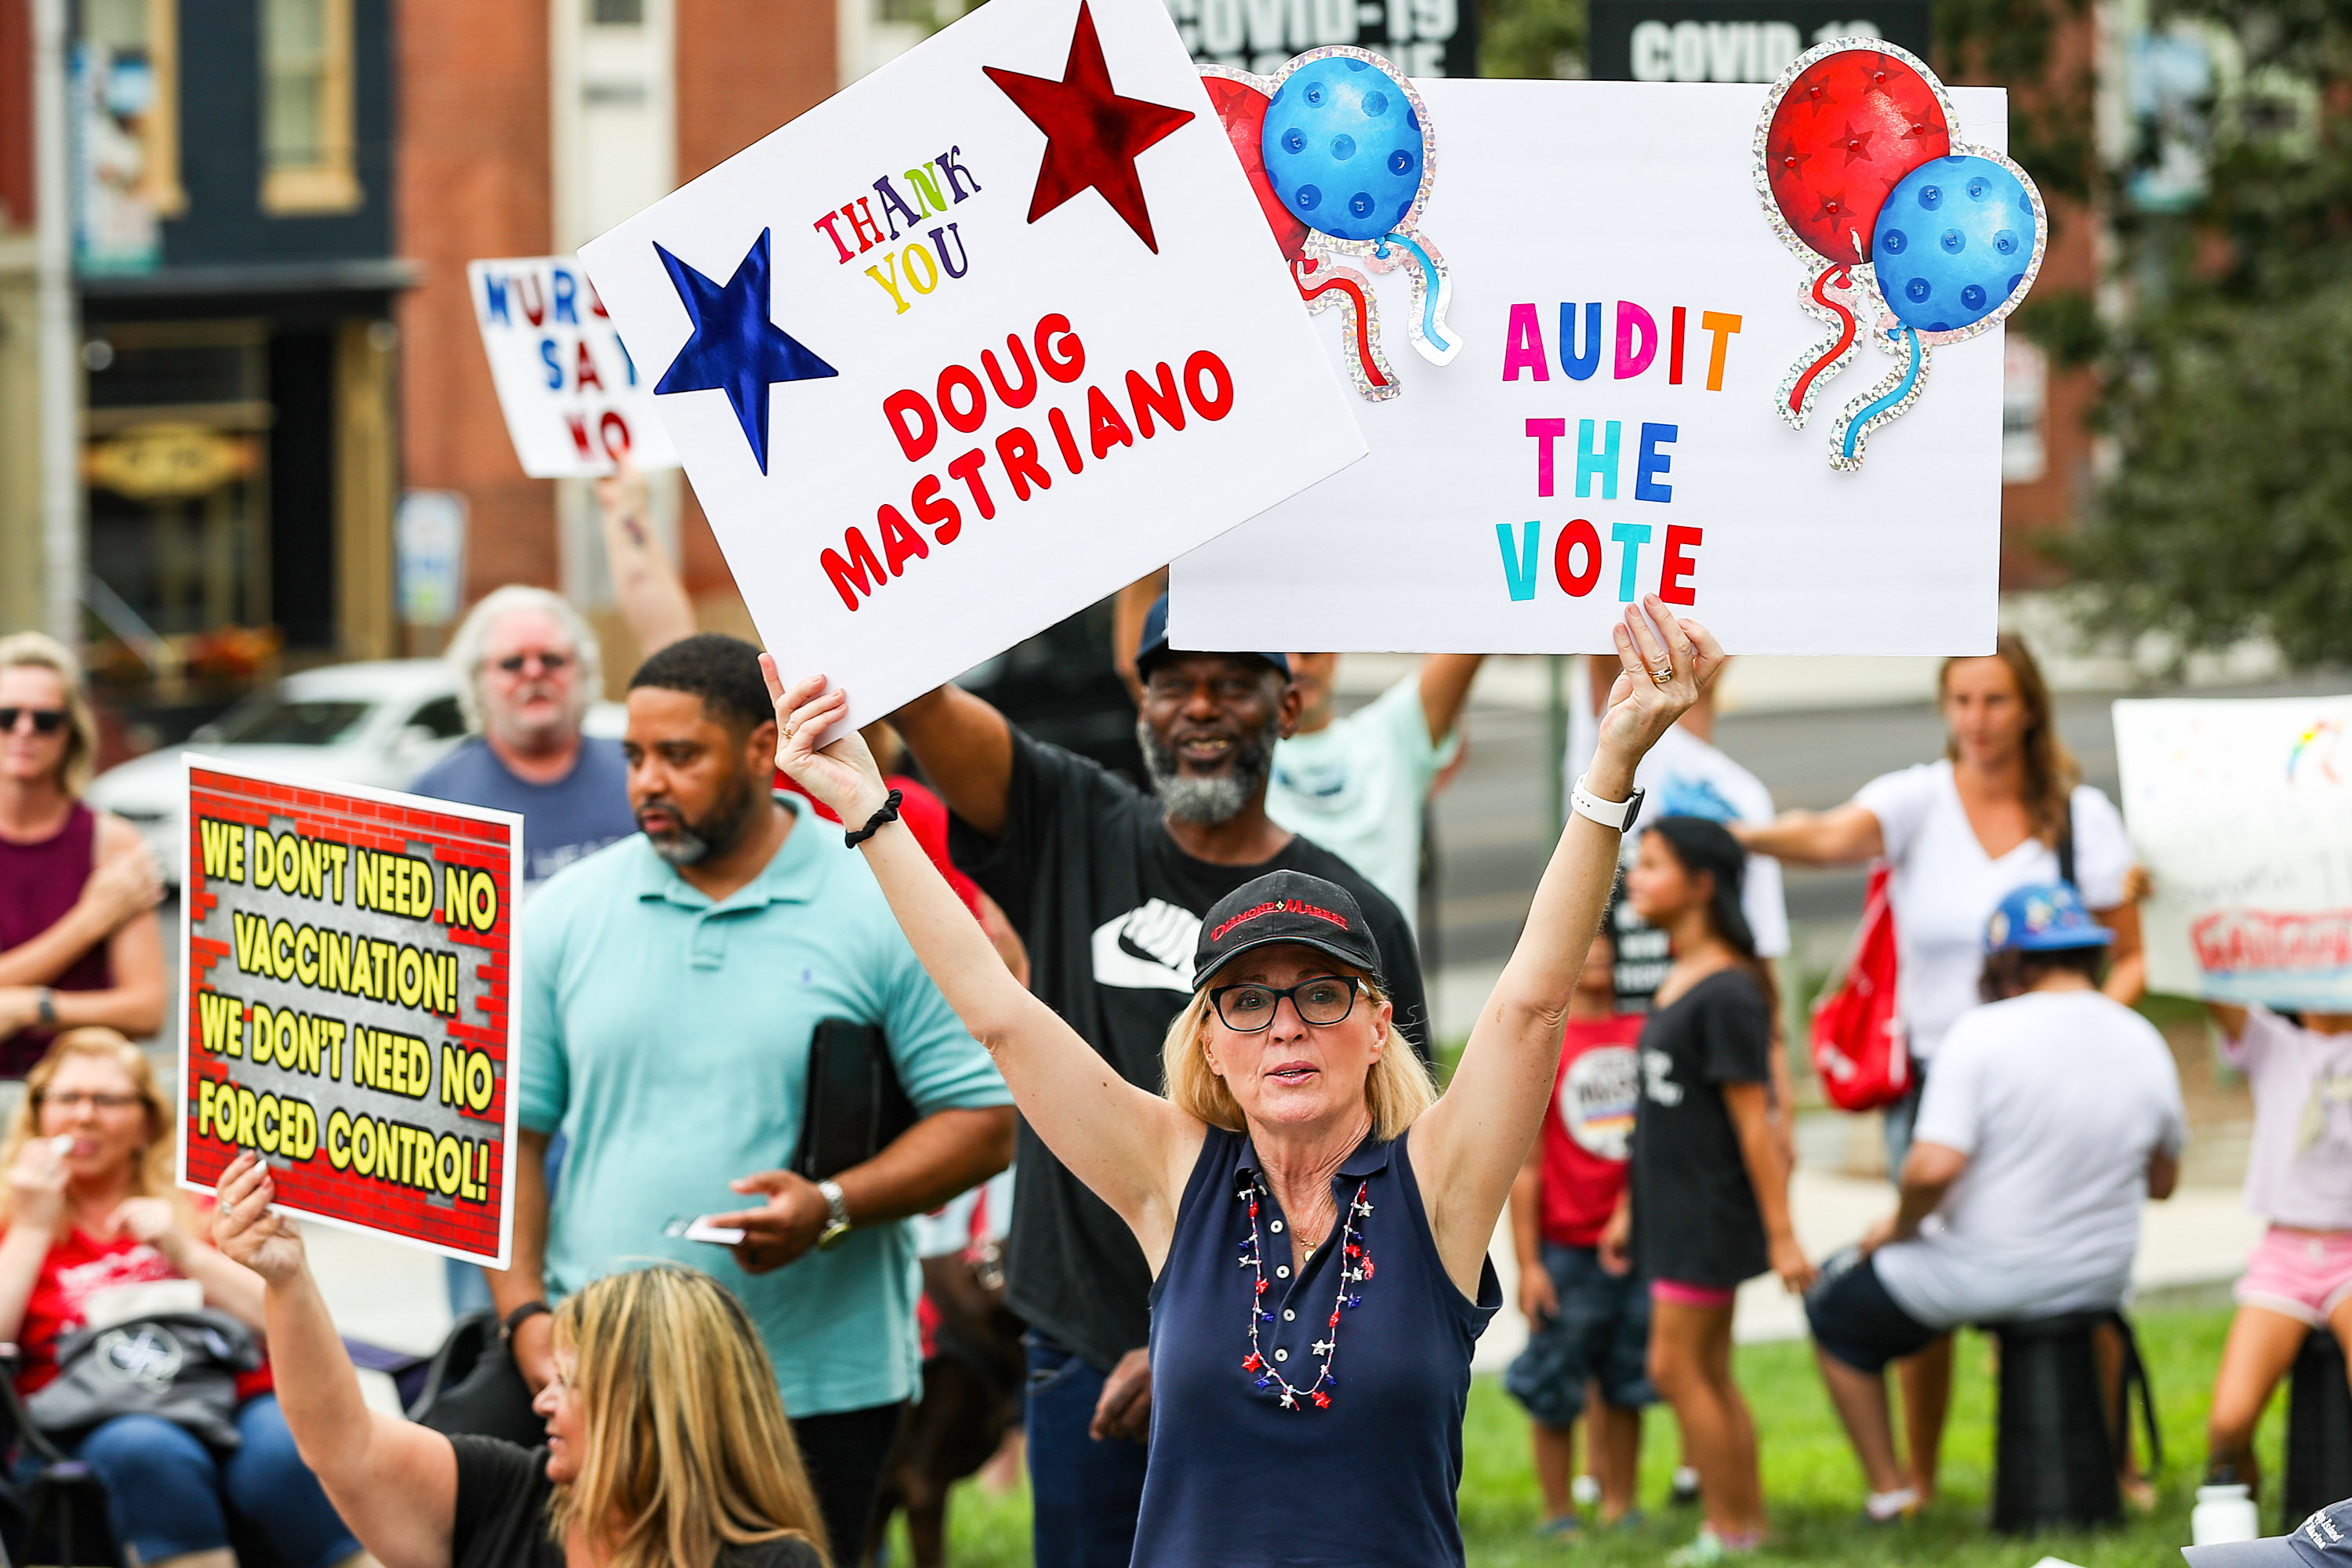 A woman amid a crowd of protesters holds up two colorful signs, one reading “Audit the vote” and another reading “Thank you Doug Mastriano.”